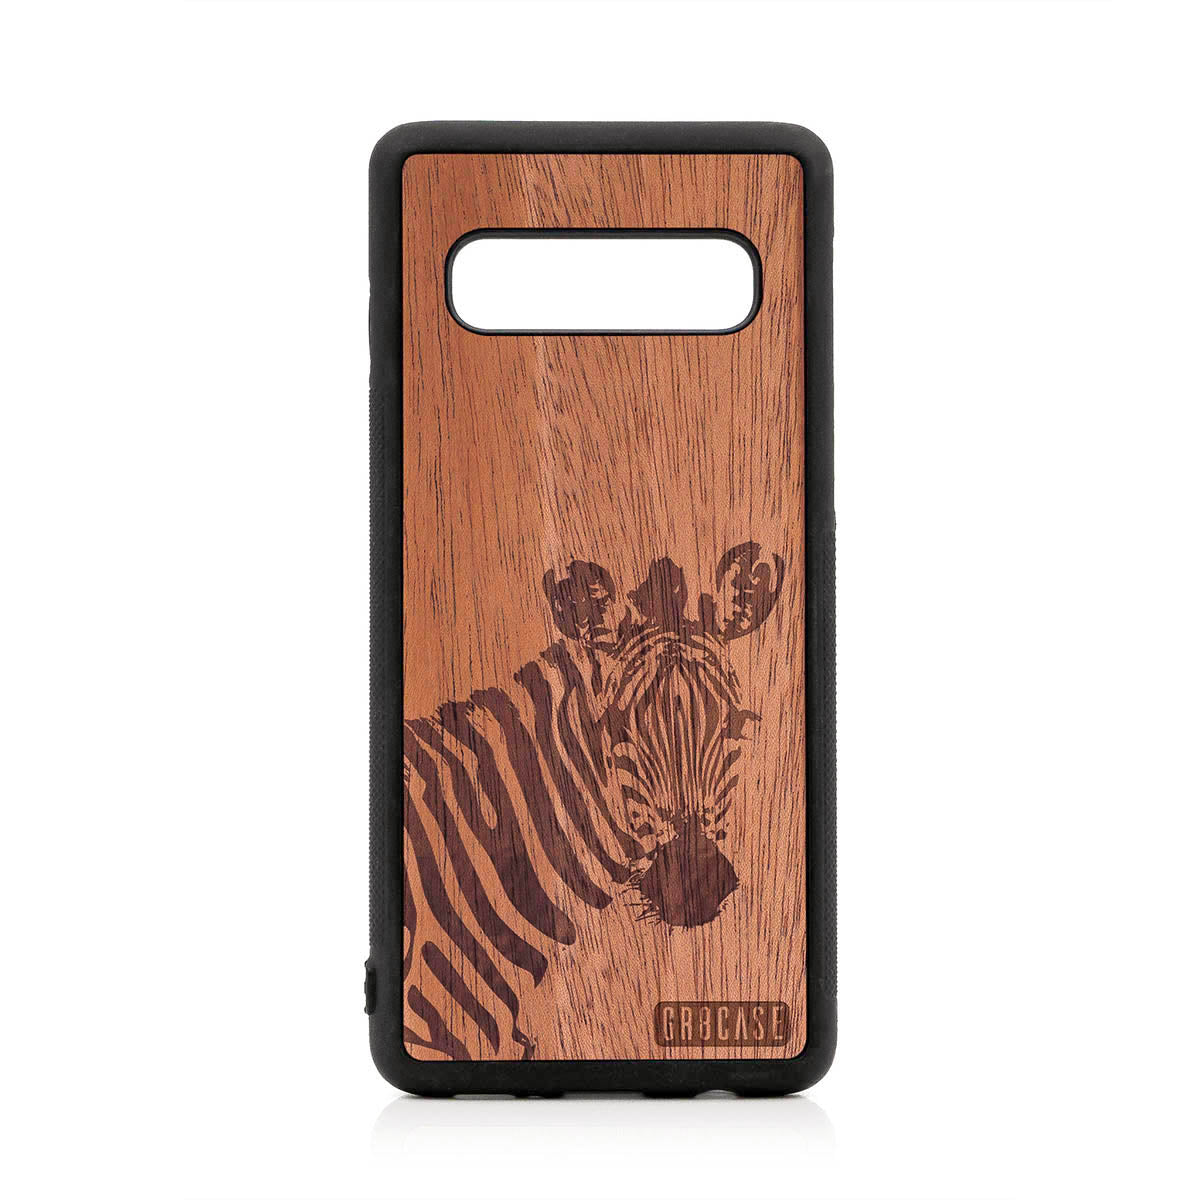 Lookout Zebra Design Wood Case For Samsung Galaxy S10